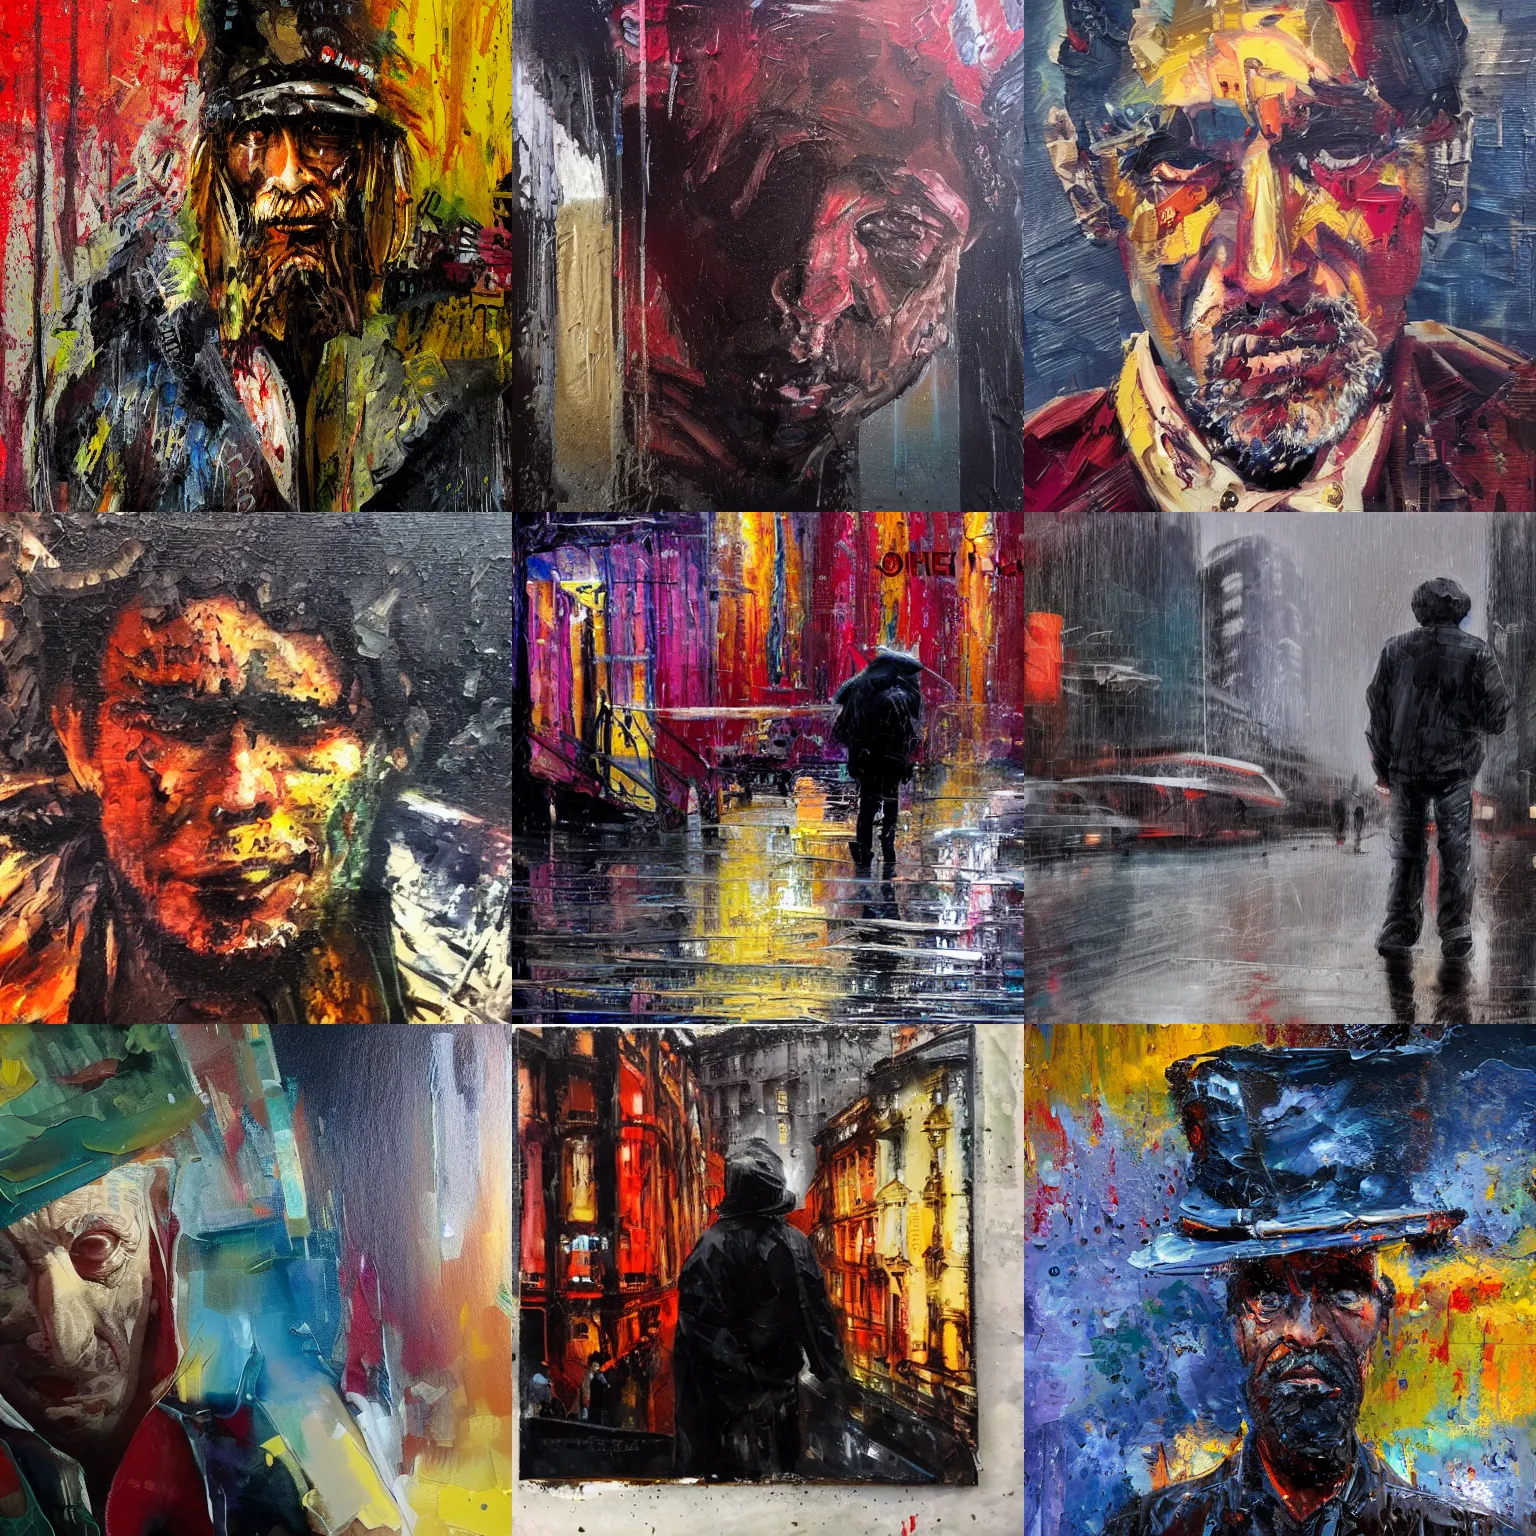 Prompt: old homeless man. new york after midnight, rain. epic futuristic scene. strong personalities and characters on the street. tired, beaten city. neo noir style, rain, oil, blood everywhere, dramatic high contrast lighting. high action! acrylic painting, layered impasto, heavy gesture style. closeup.